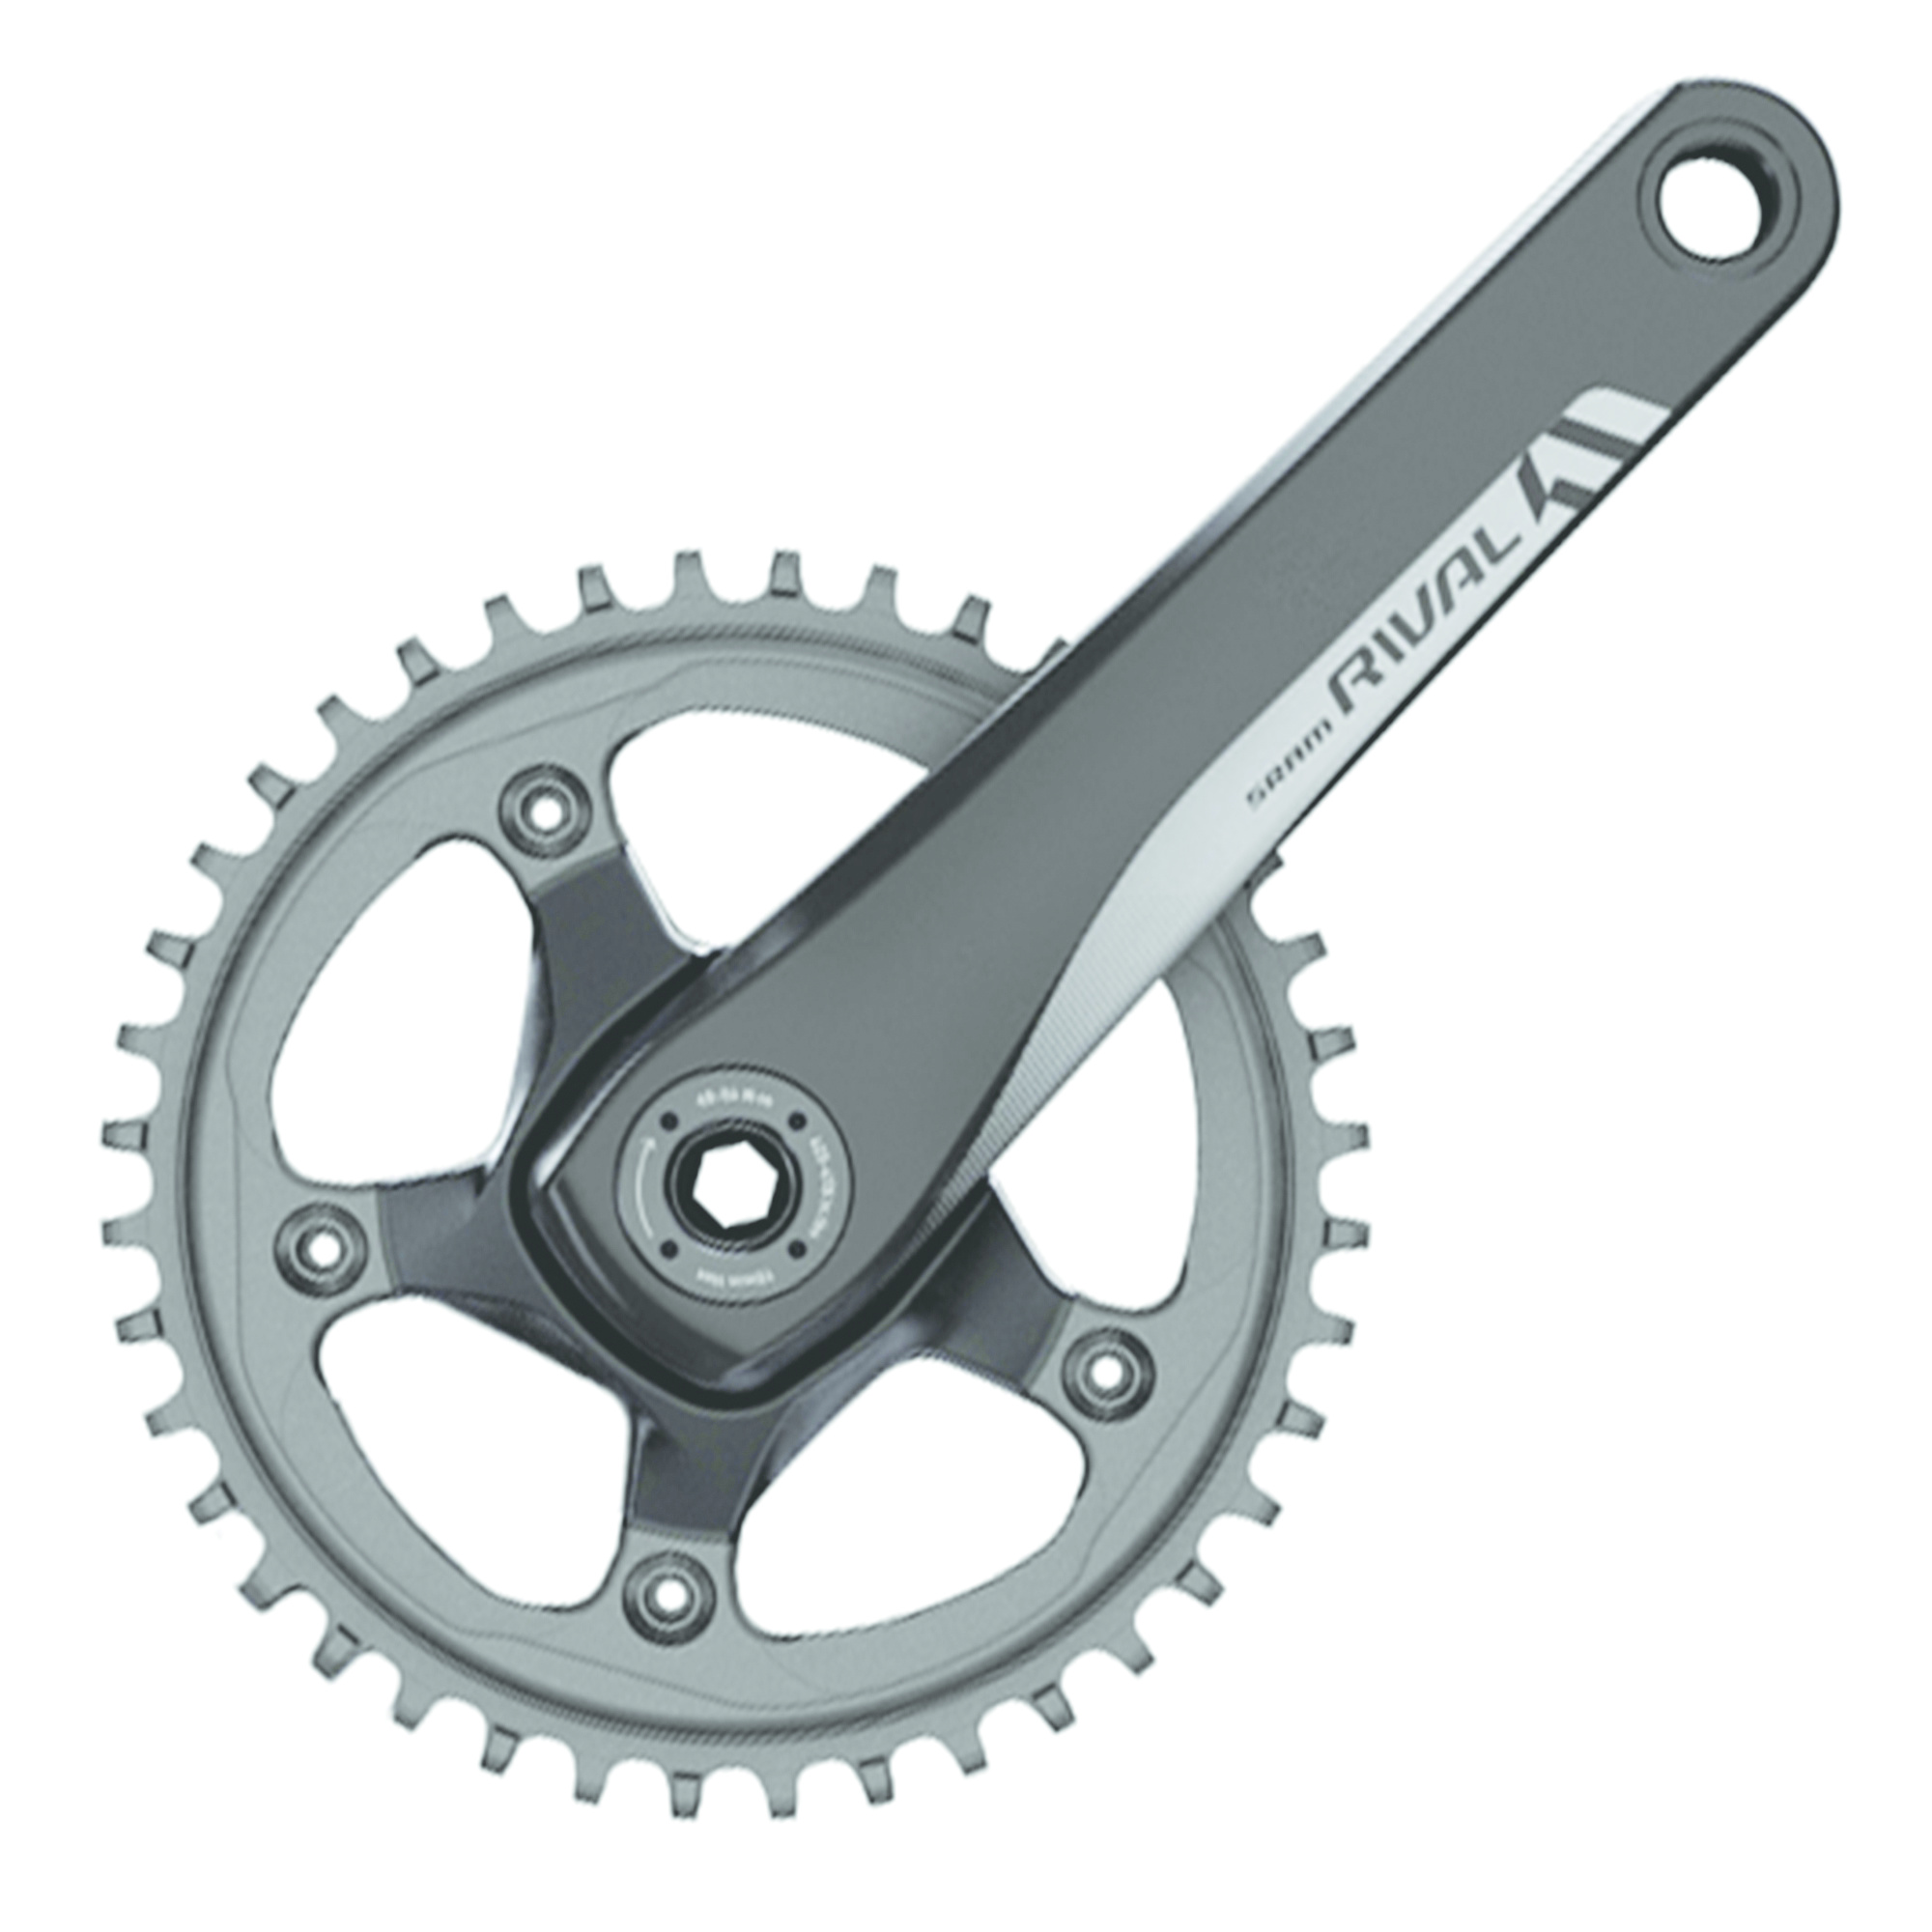 SRAM Rival 1 - 11 Speed Crankset 170mm 42 Tooth 110 BCD 68mm GXP